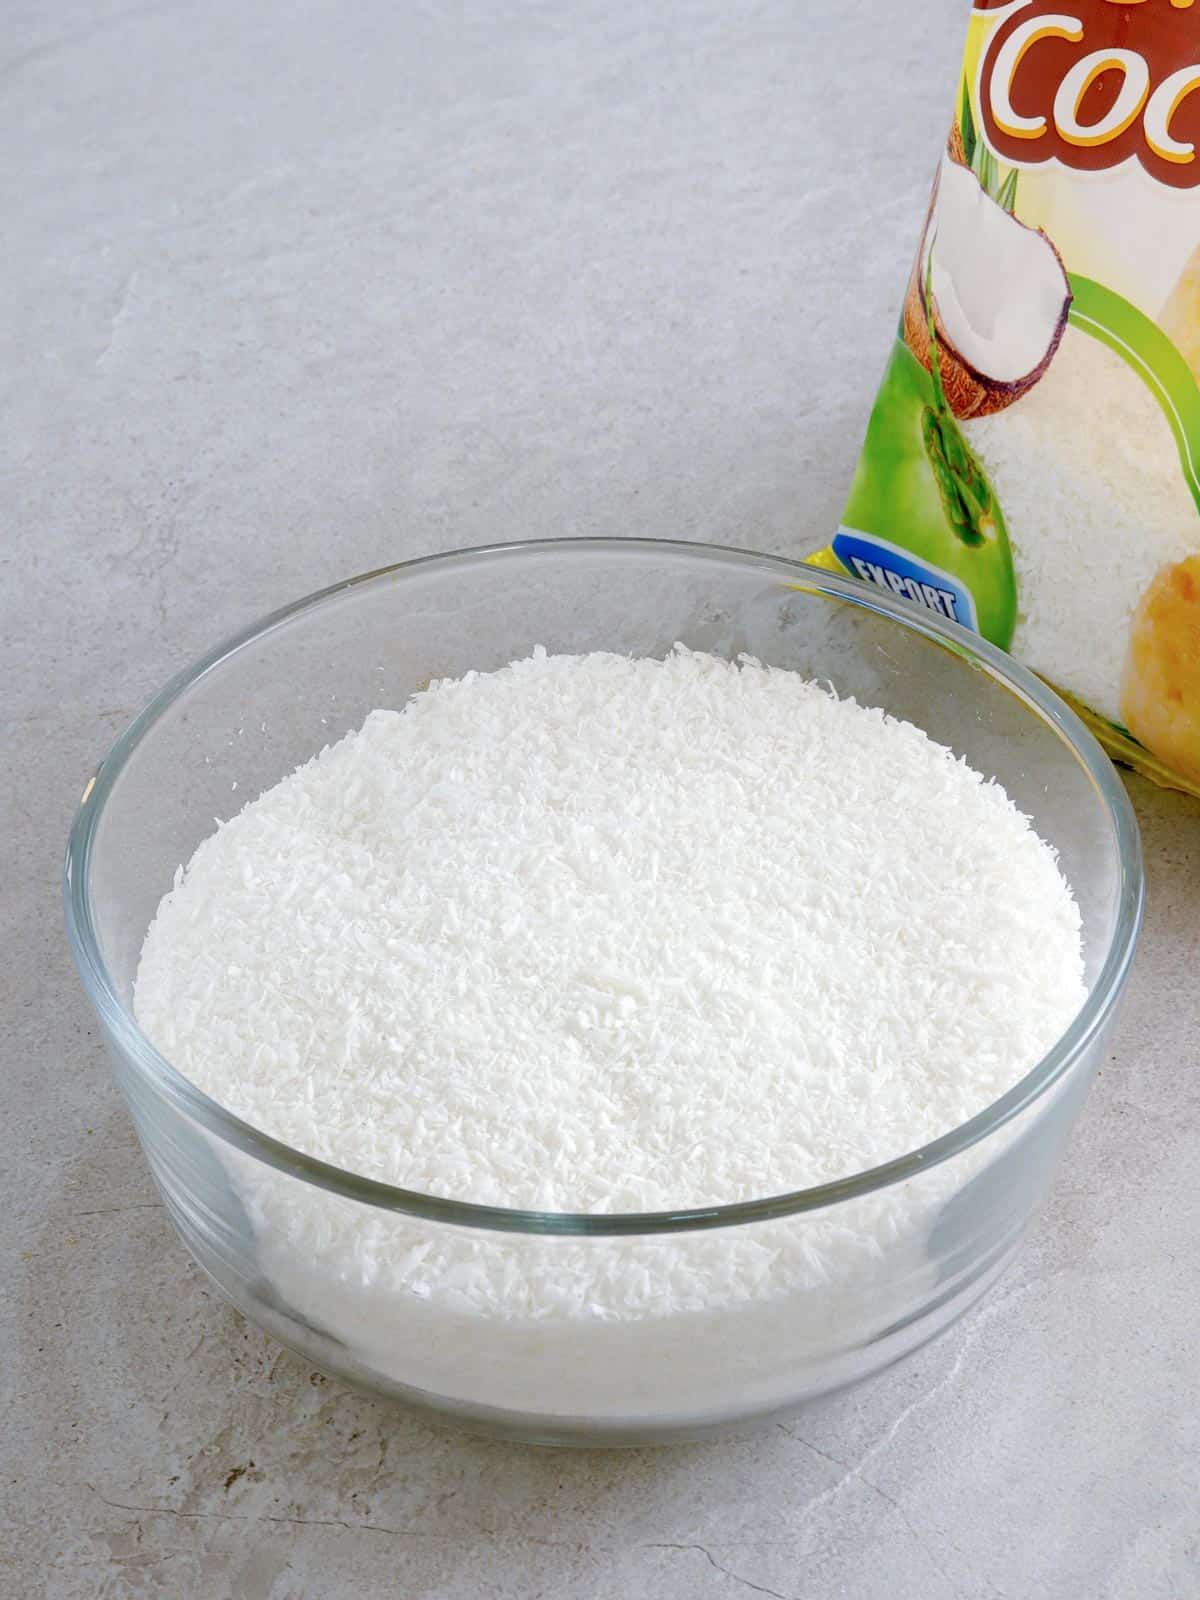 shredded coconut in a bowl